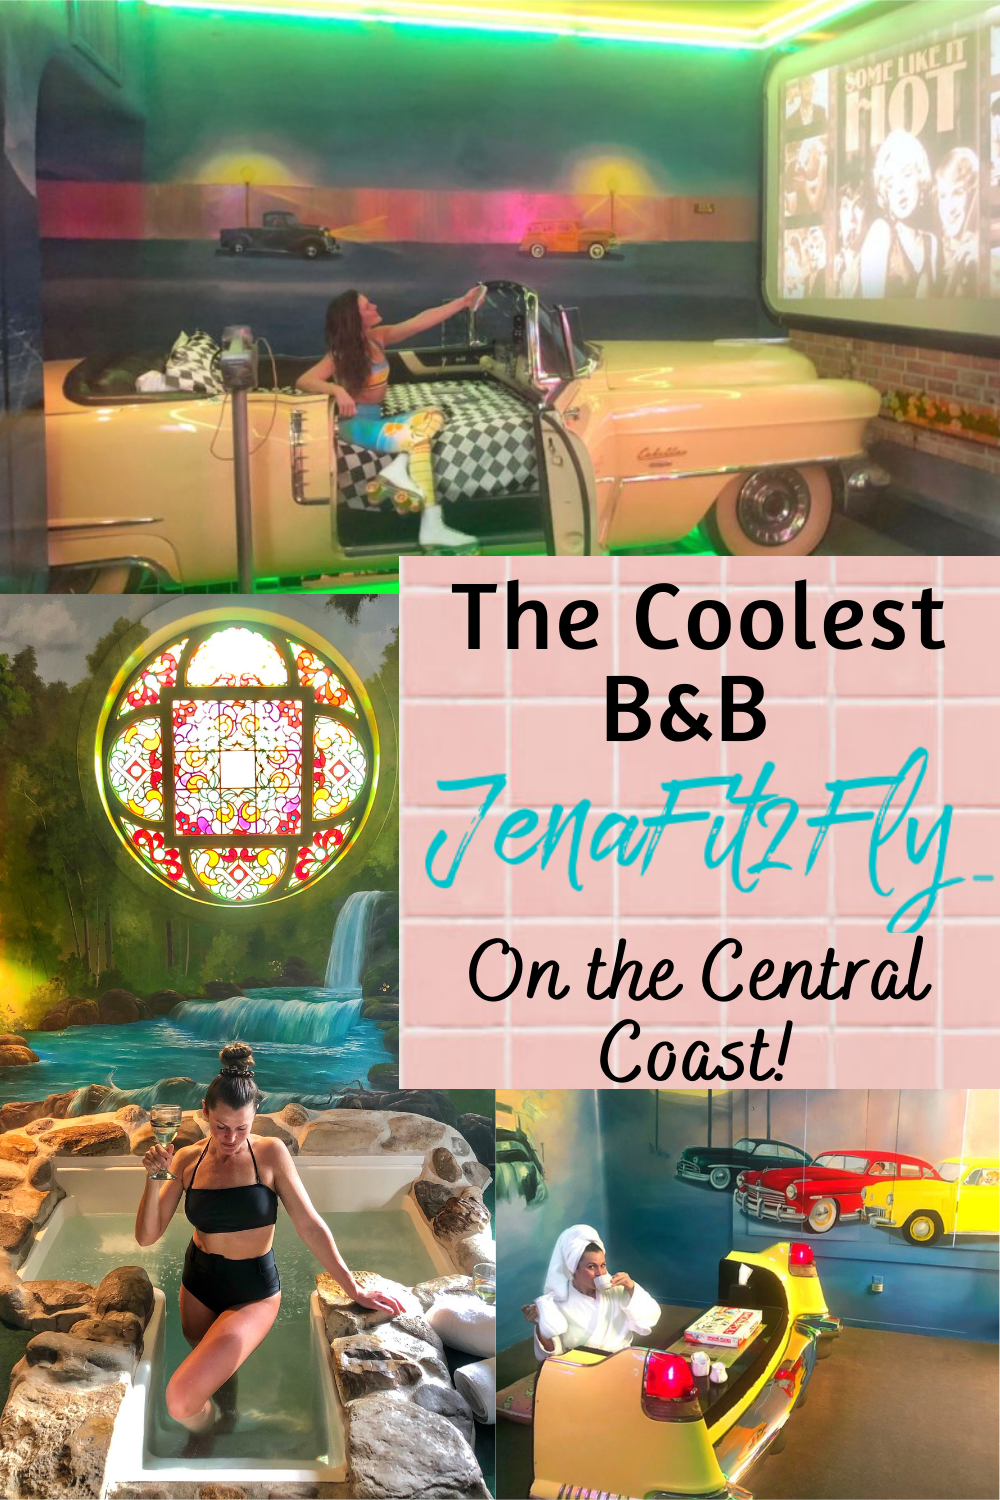 The coolest Bed and Breakfast on the central coast happens to be in the tiny town of Los Alamos, California. Hidden inside an old victorian mansion is bed and breakfast like no other. Here's everything you need to know to book the coolest Bed and Breakfast on the central coast!